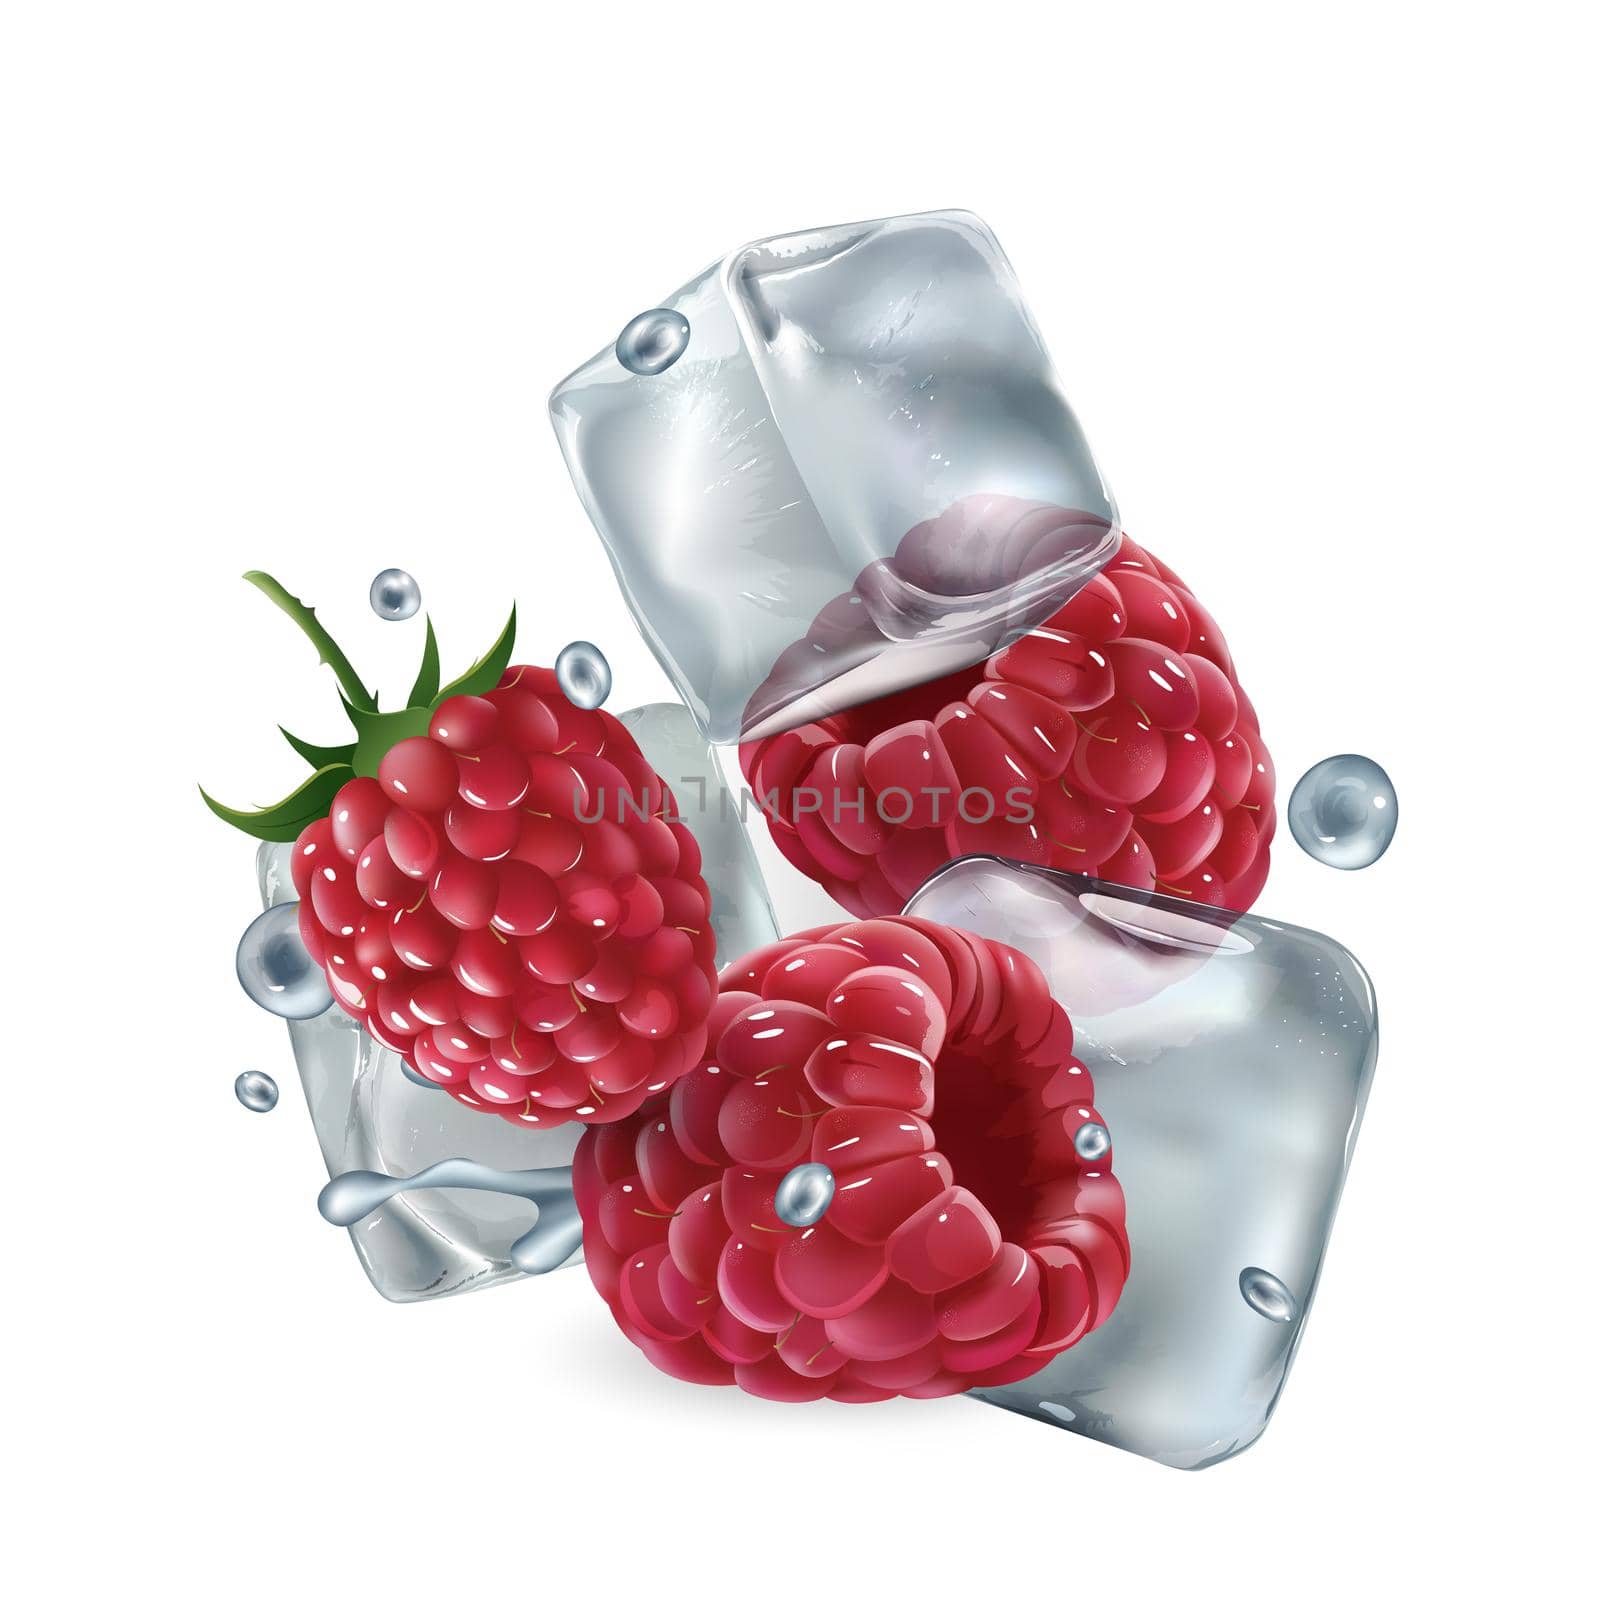 Composition with fresh raspberries and ice cubes on a white background. Realistic style illustration.